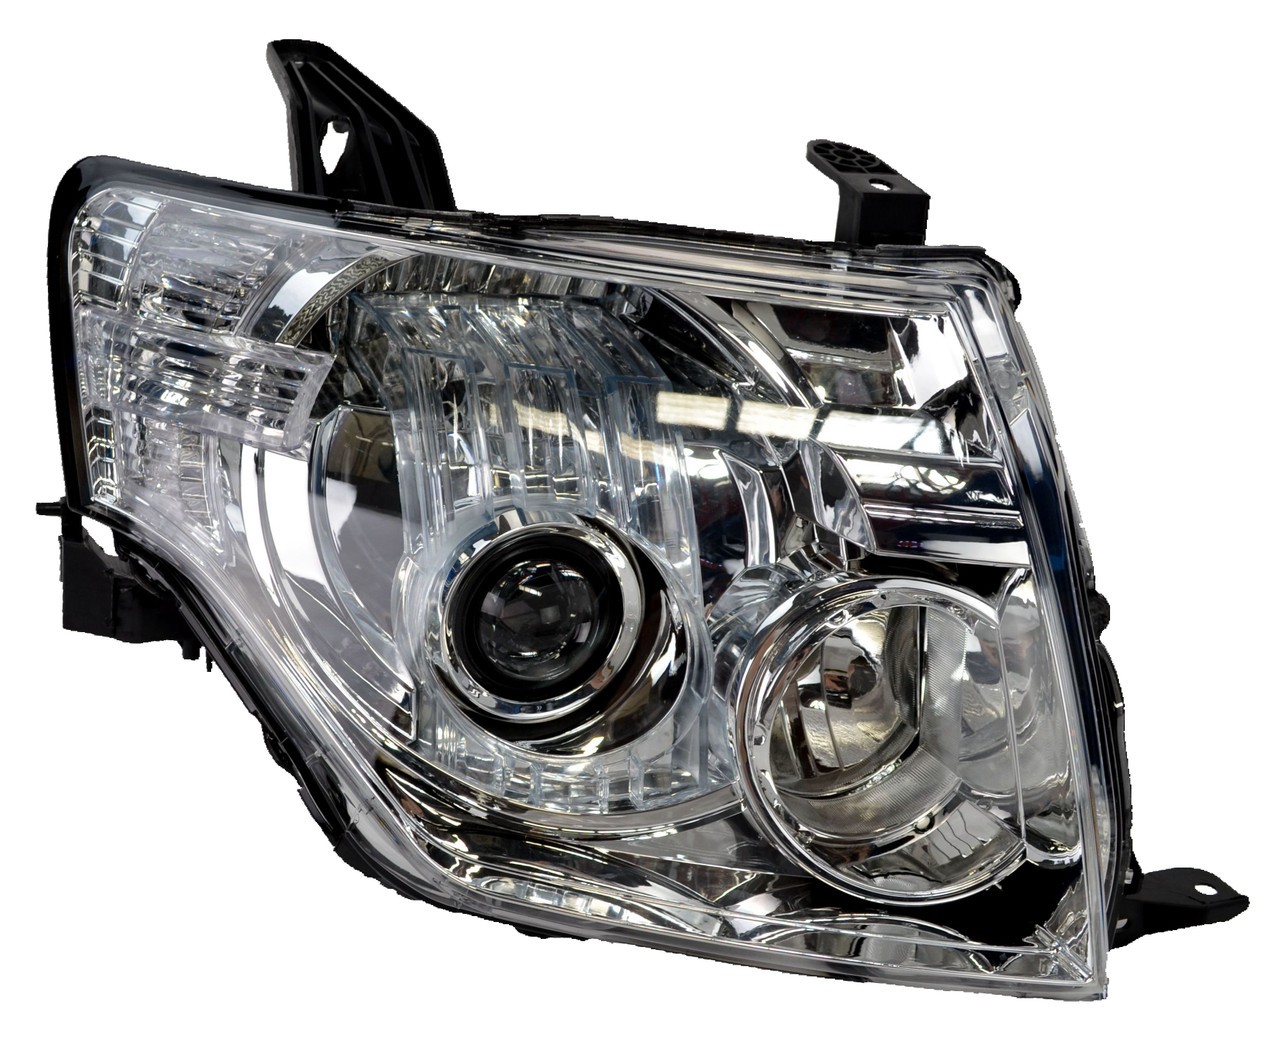 Headlight for Mitsubishi Pajero NS/NT/NW 11/06-06/14 New Right Front Lamp 11 12 13